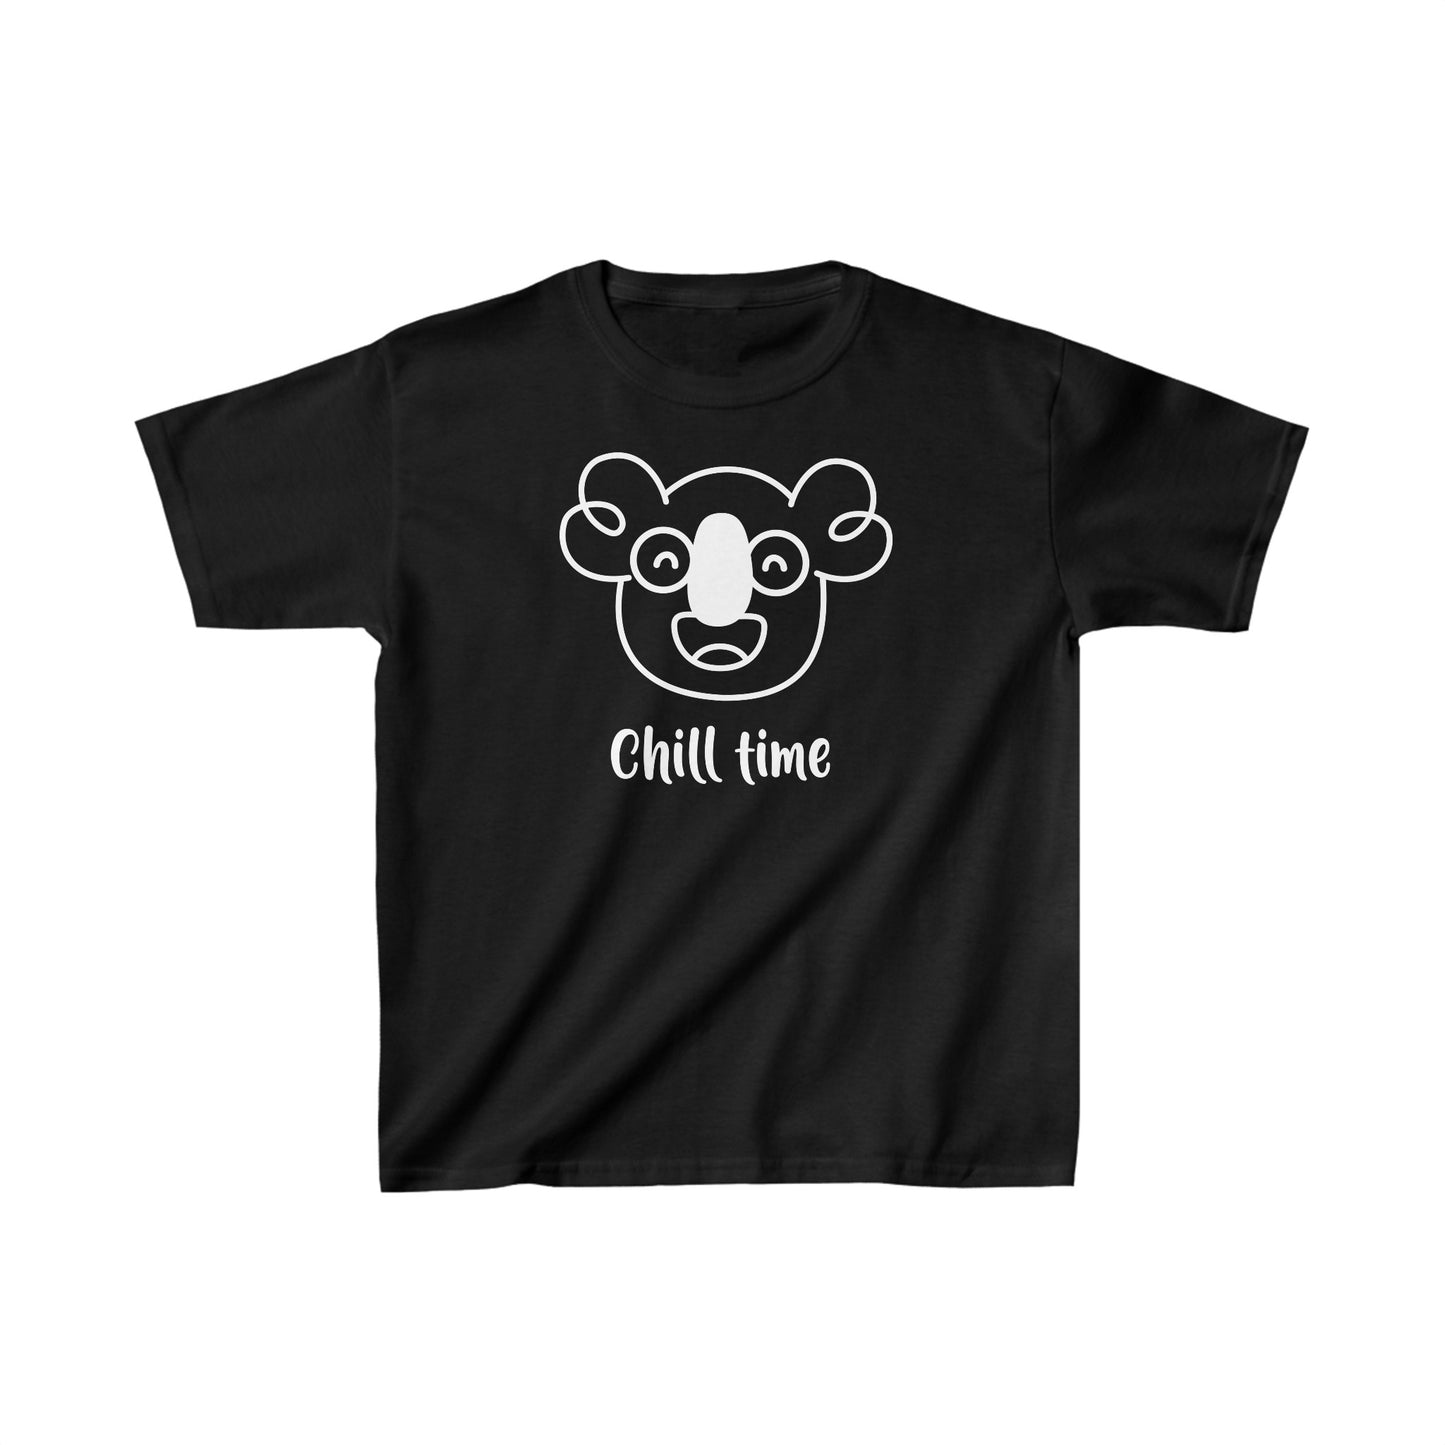 Boo's Chill Time Kid's T-shirt - Vibrant Colors